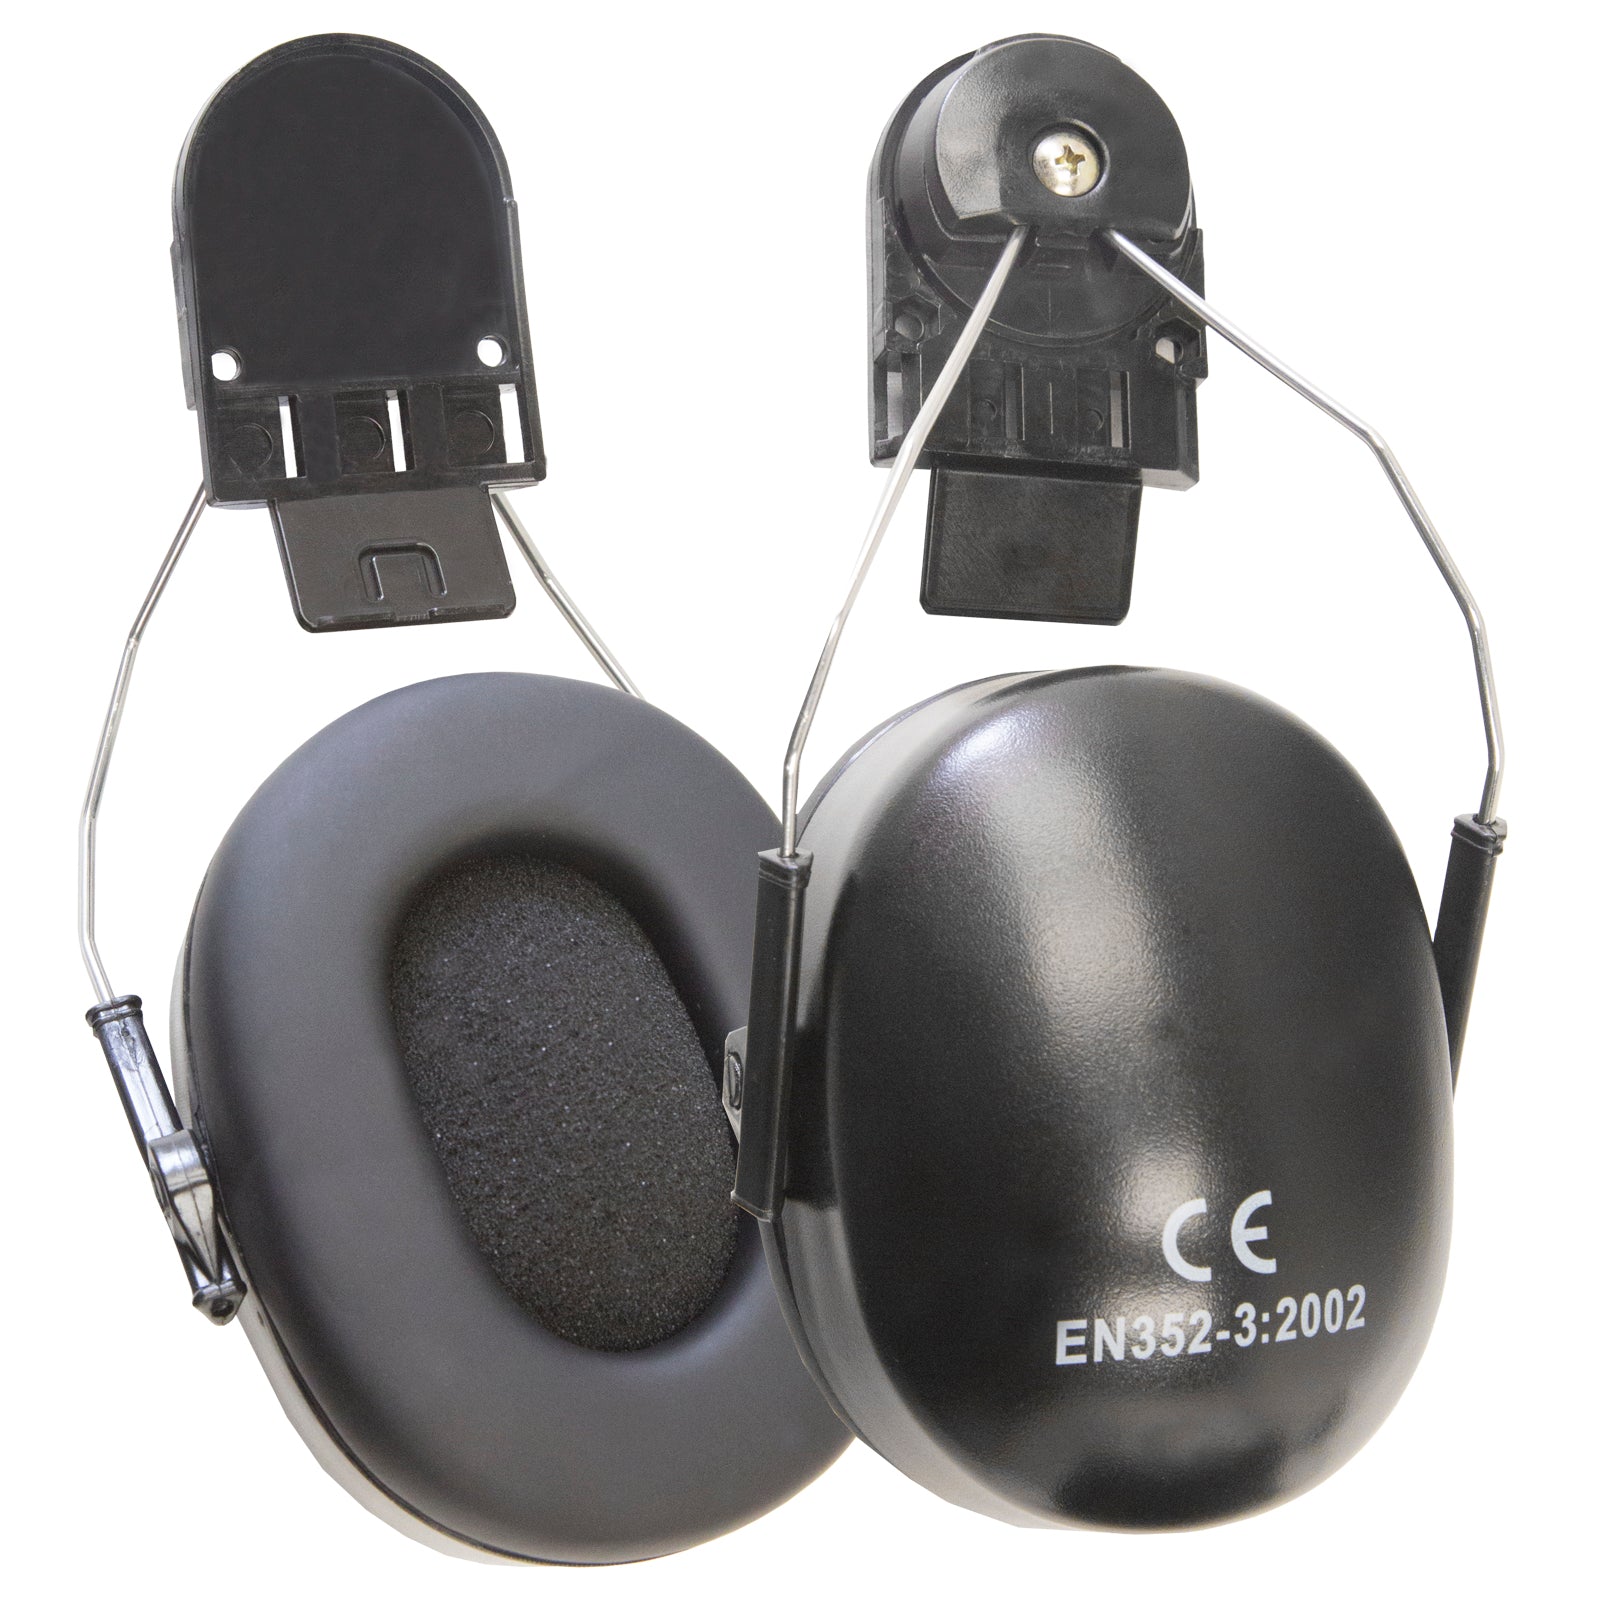 3M PELTOR Hearing Protection & Hearing Protection Accessories